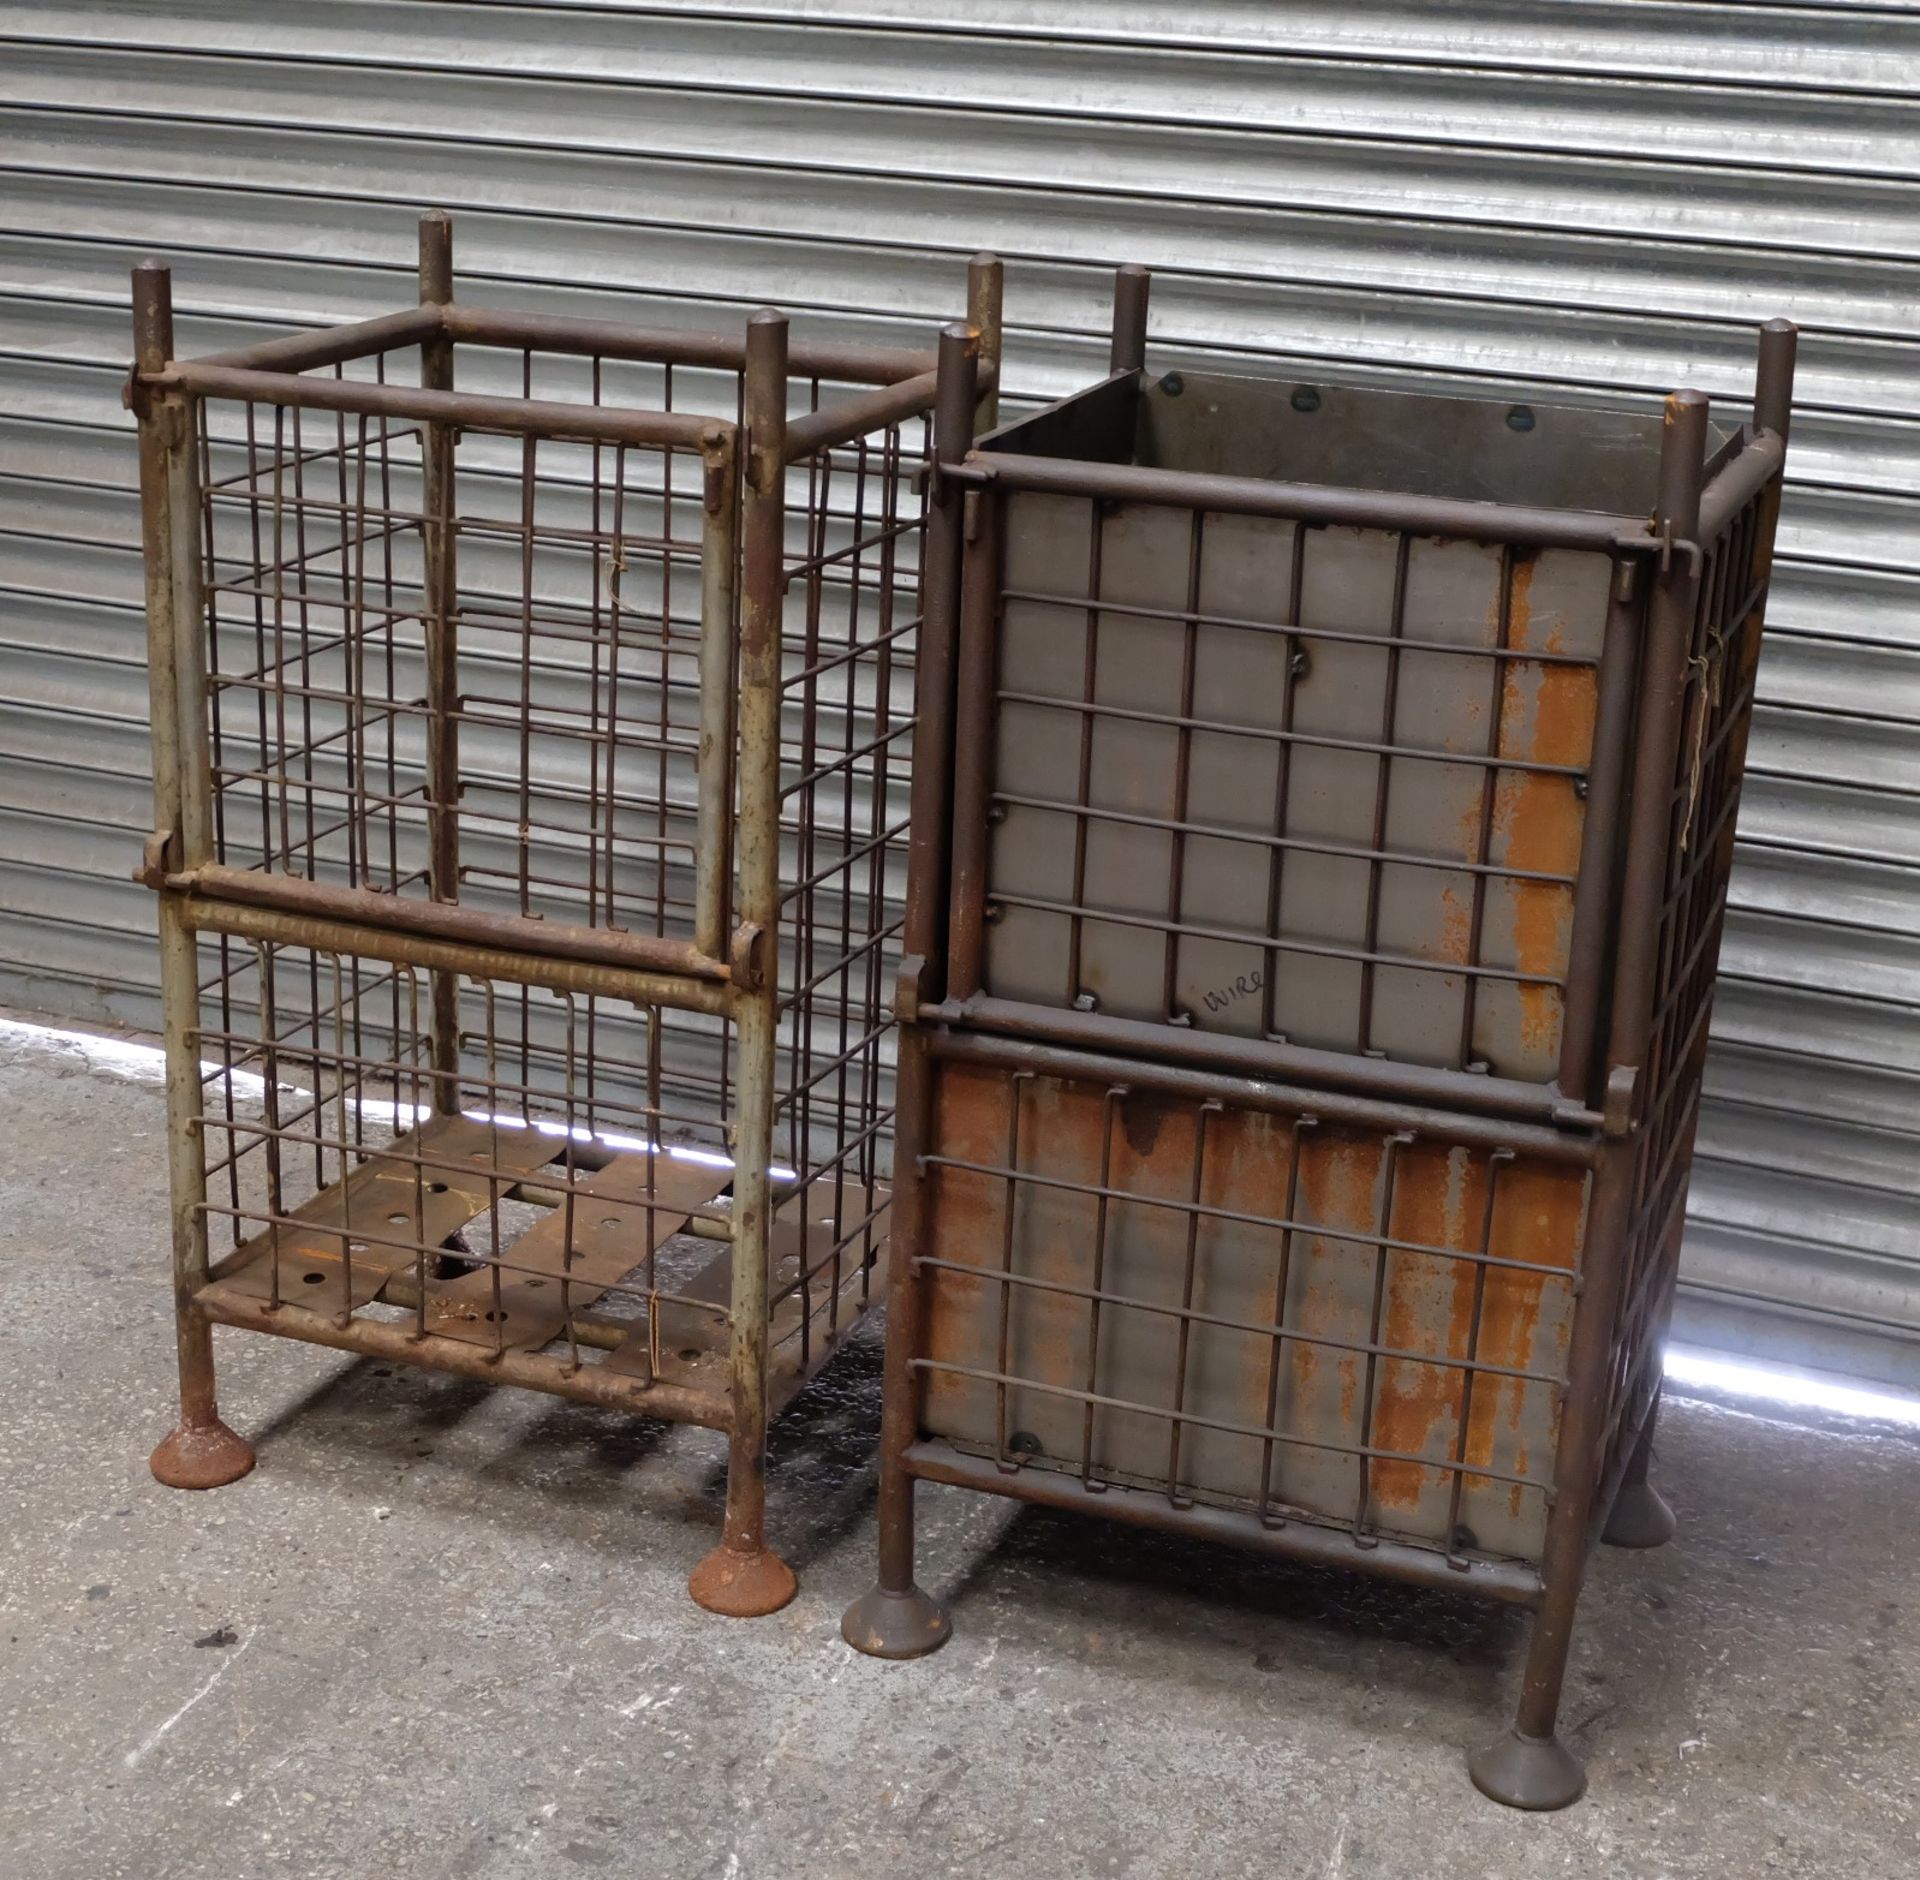 2 Steel Stillages, 21in x 25in x 48in h, 35in inte - Image 2 of 6